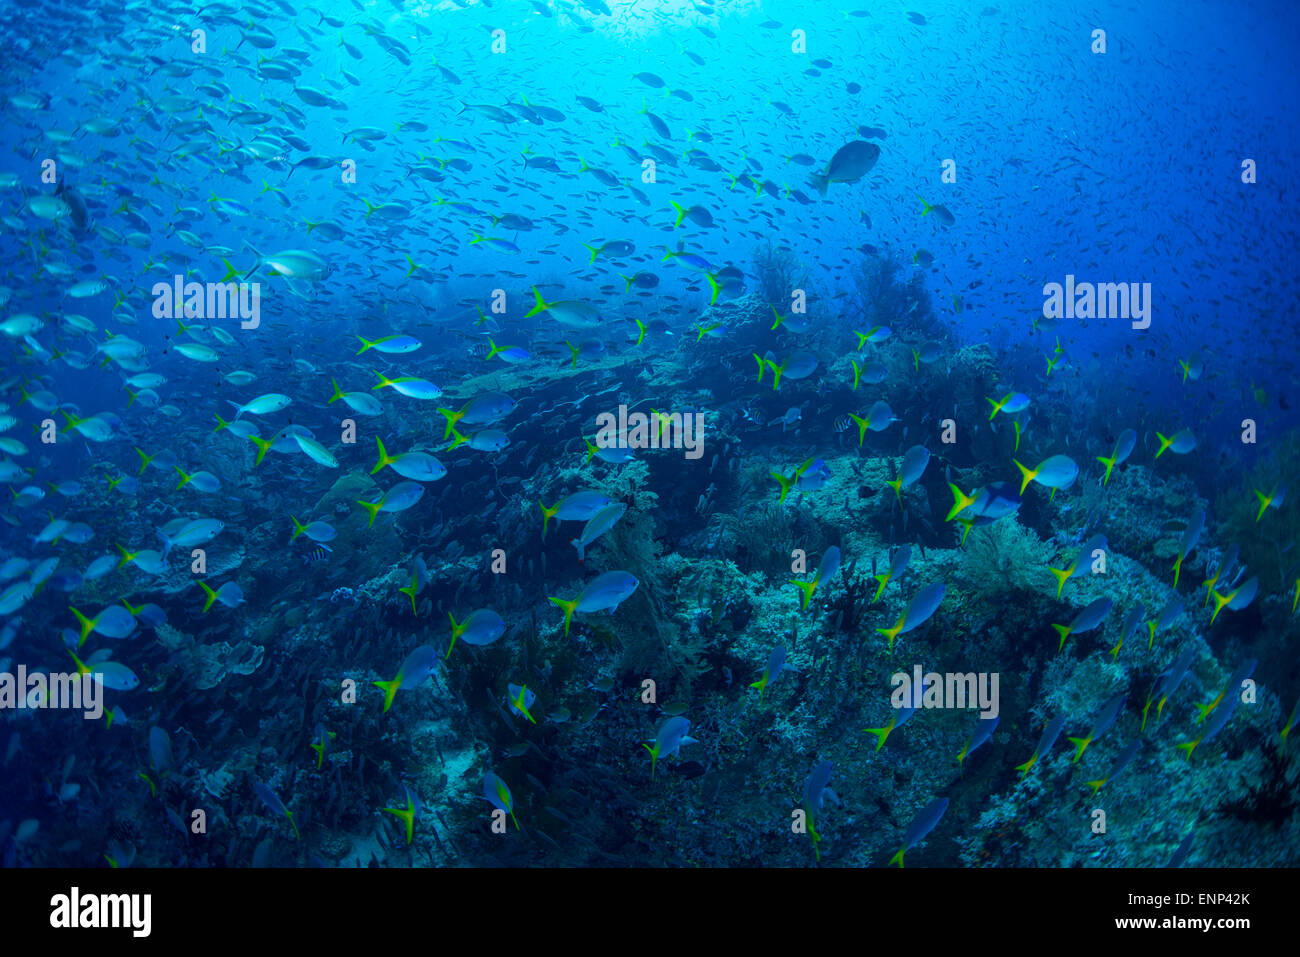 dramatic underwater scene with lots of schools of fish and reef in the background Stock Photo